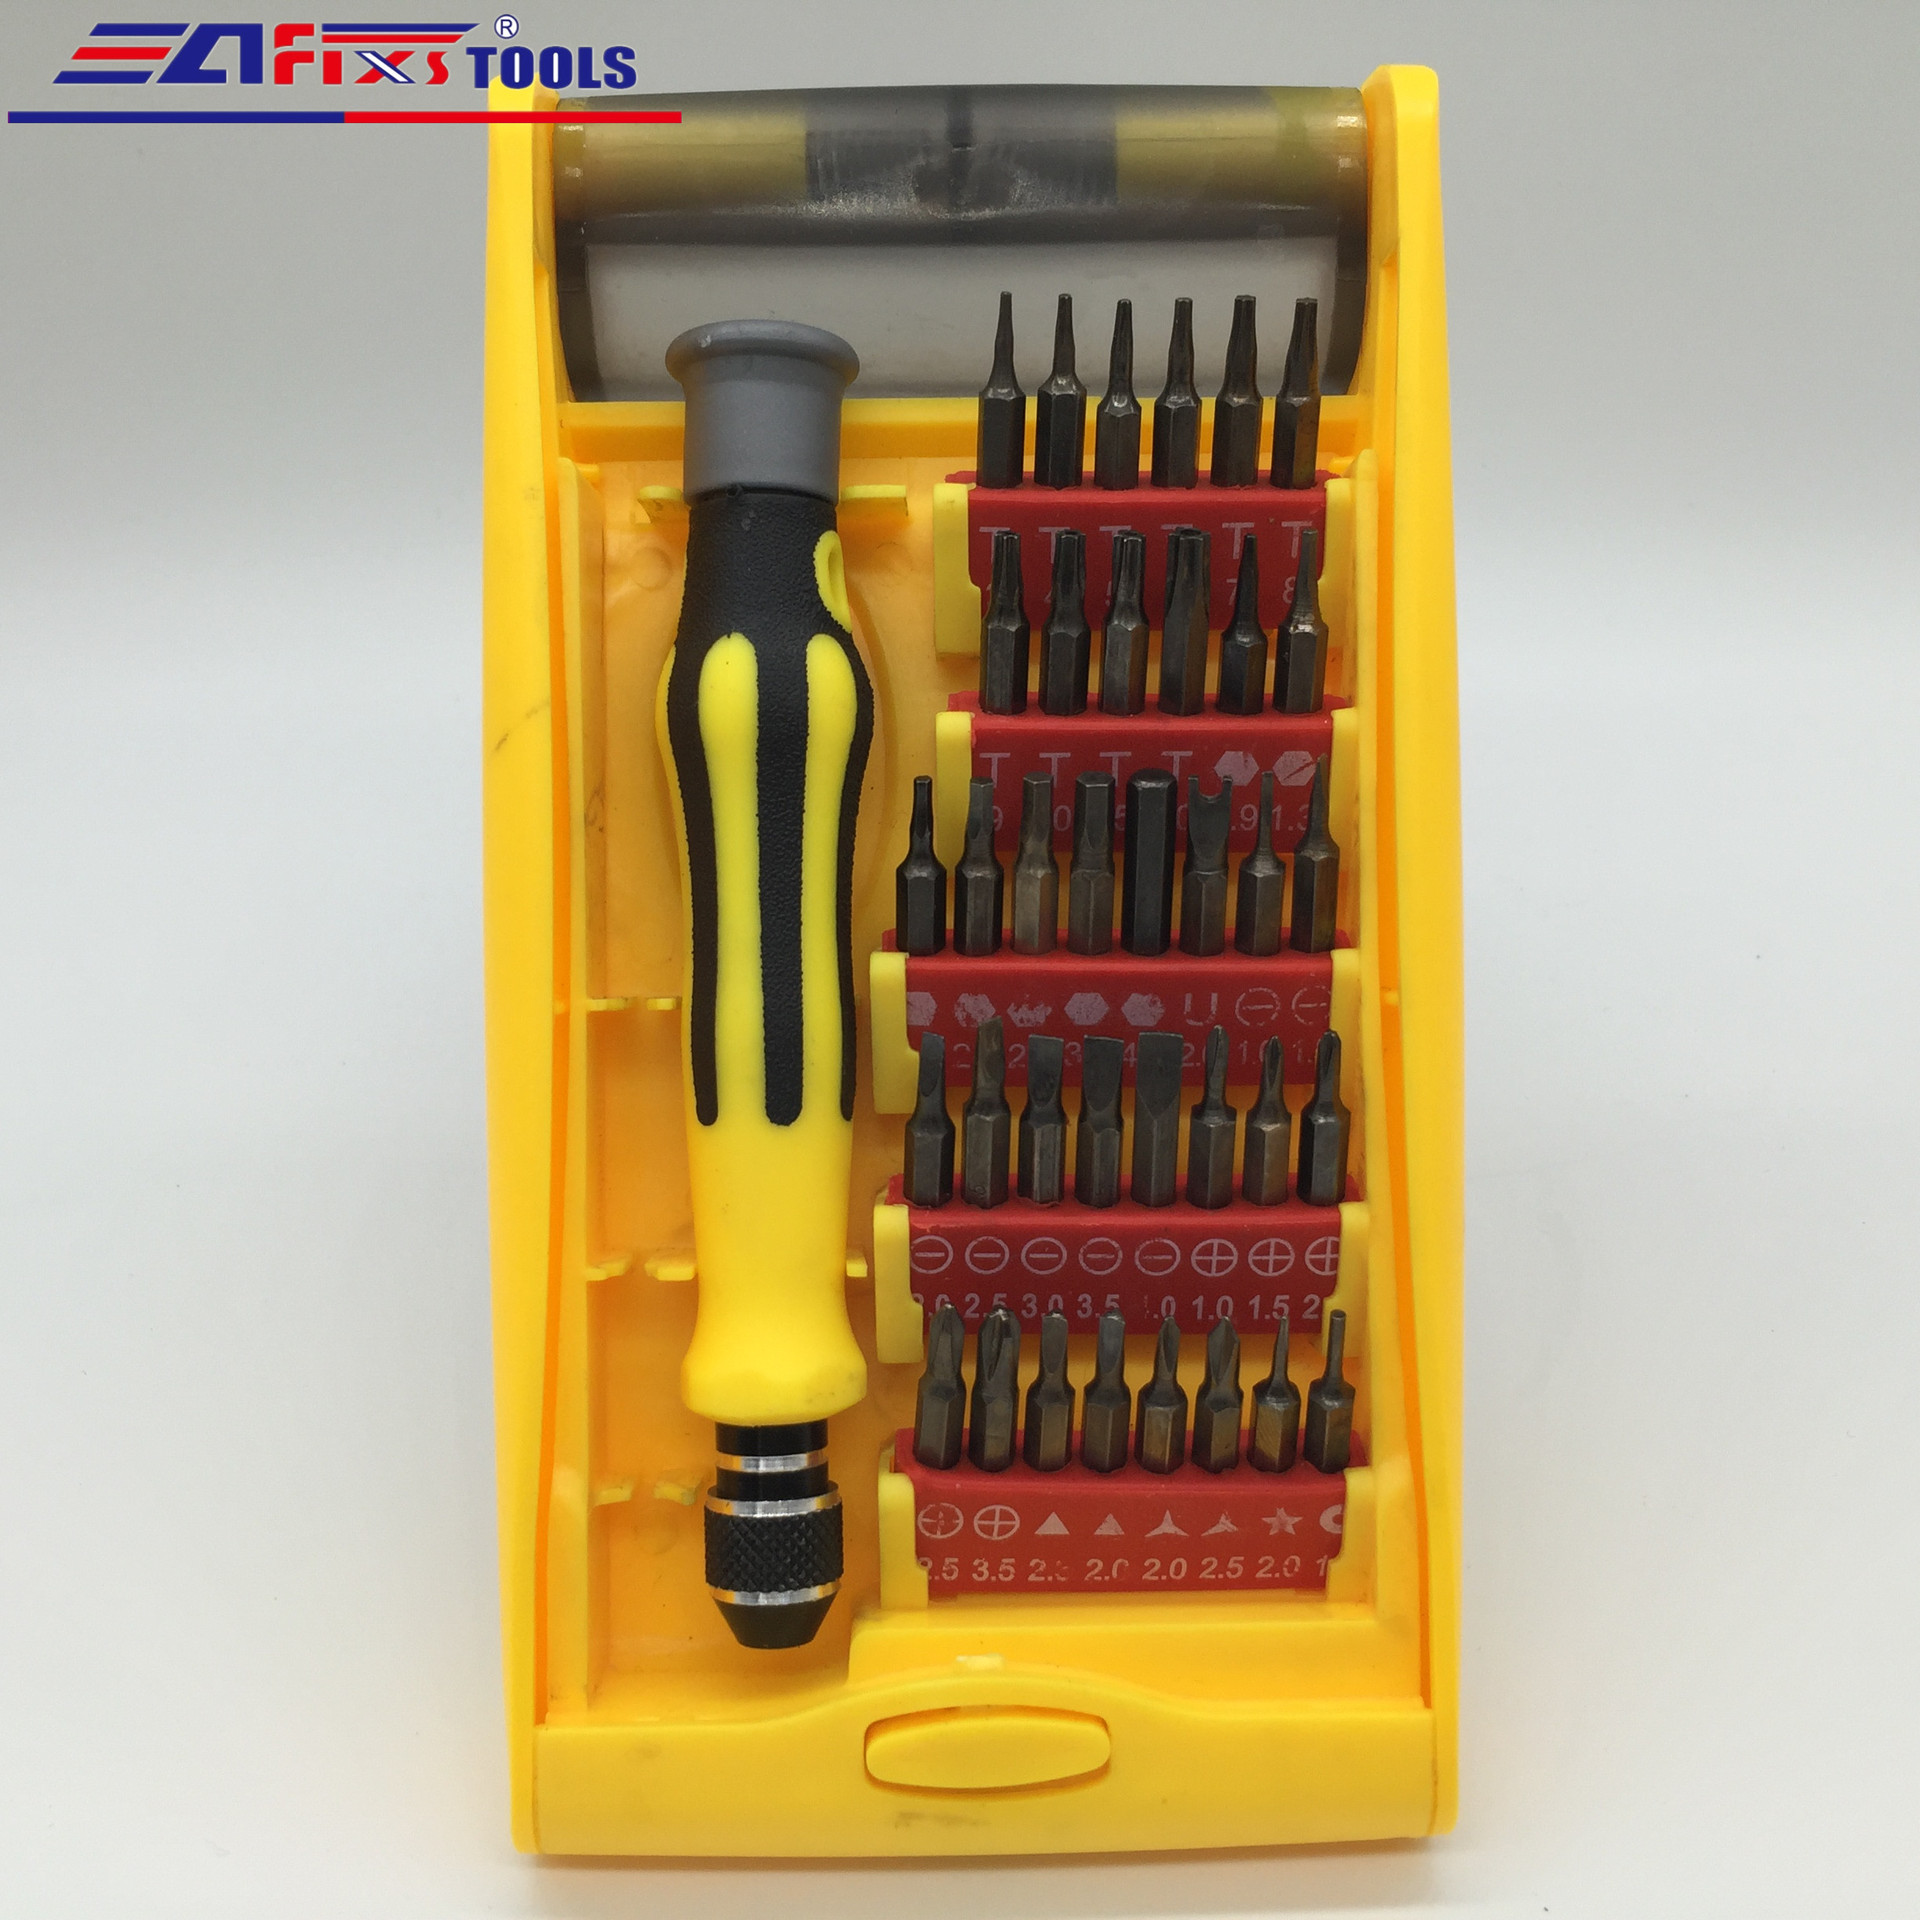 6090b Telecommunications Screwdriver Precision Screwdriver Multi-Function Set Tool Repair Computer Tools for Cellphone Disassembly